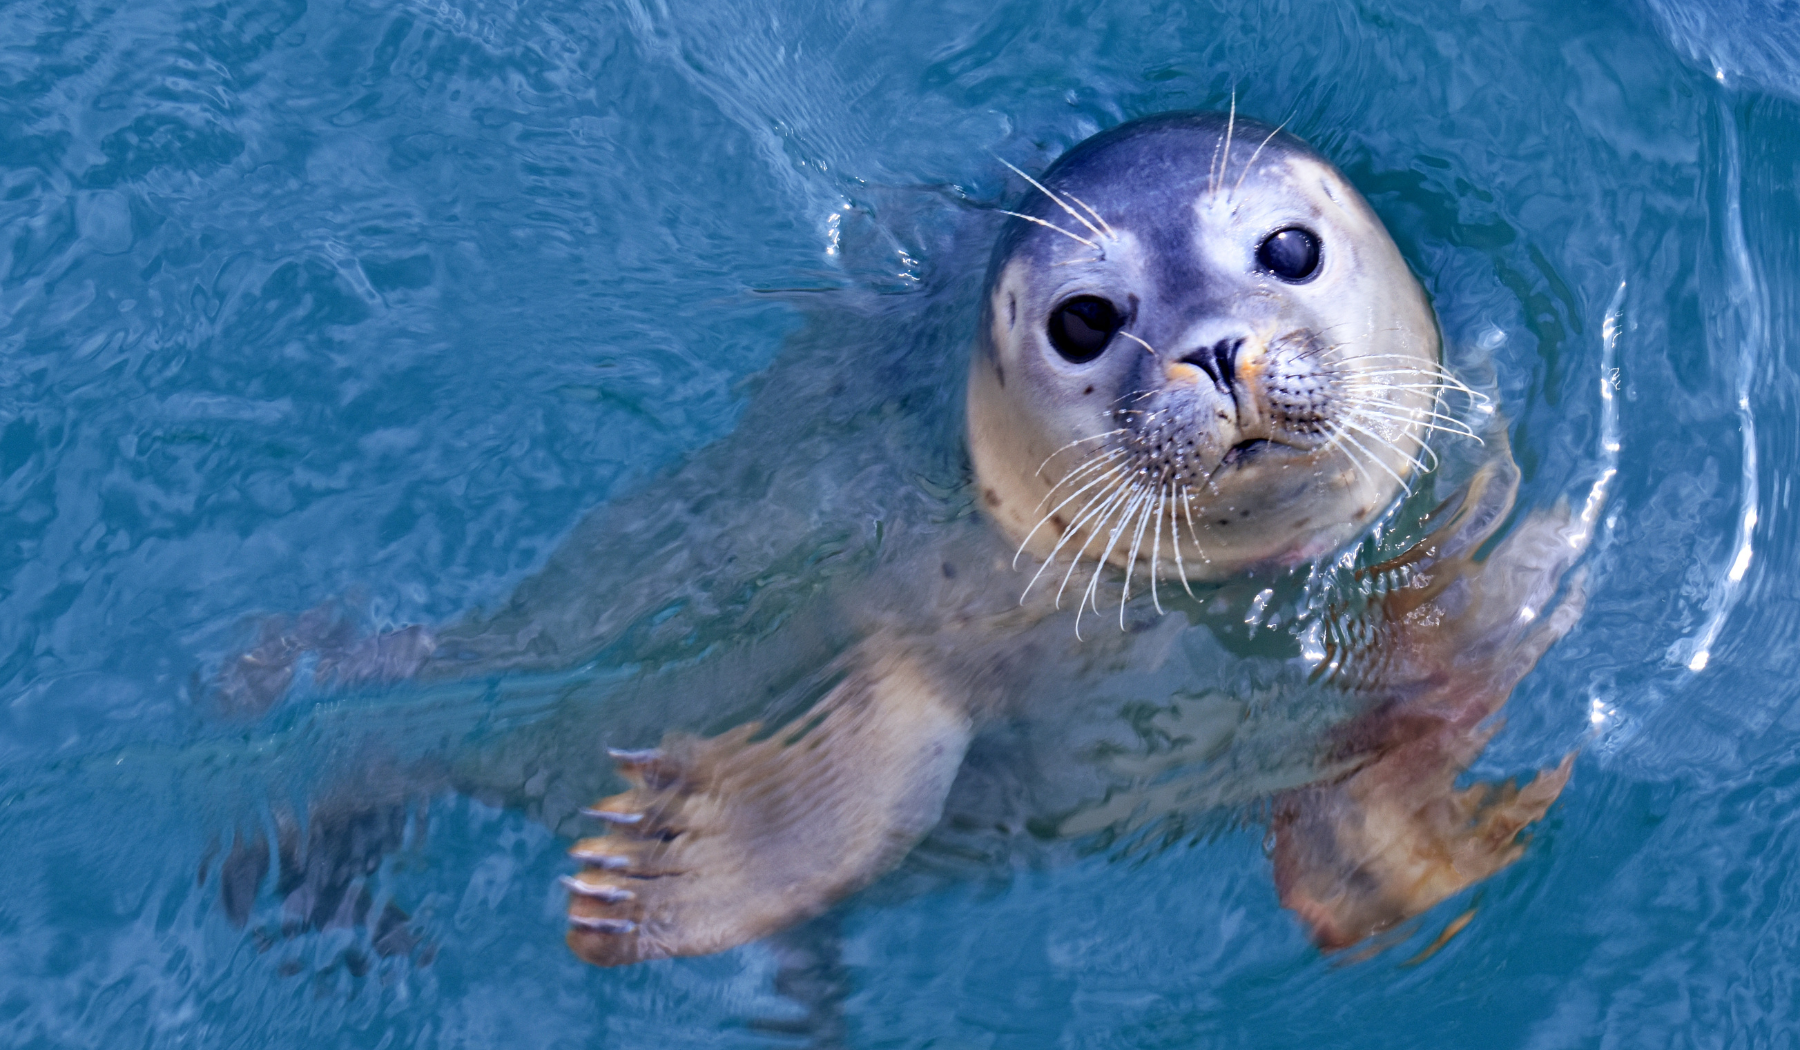 Fun facts about seals on P.E.I.: Amazing, intelligent and beautiful